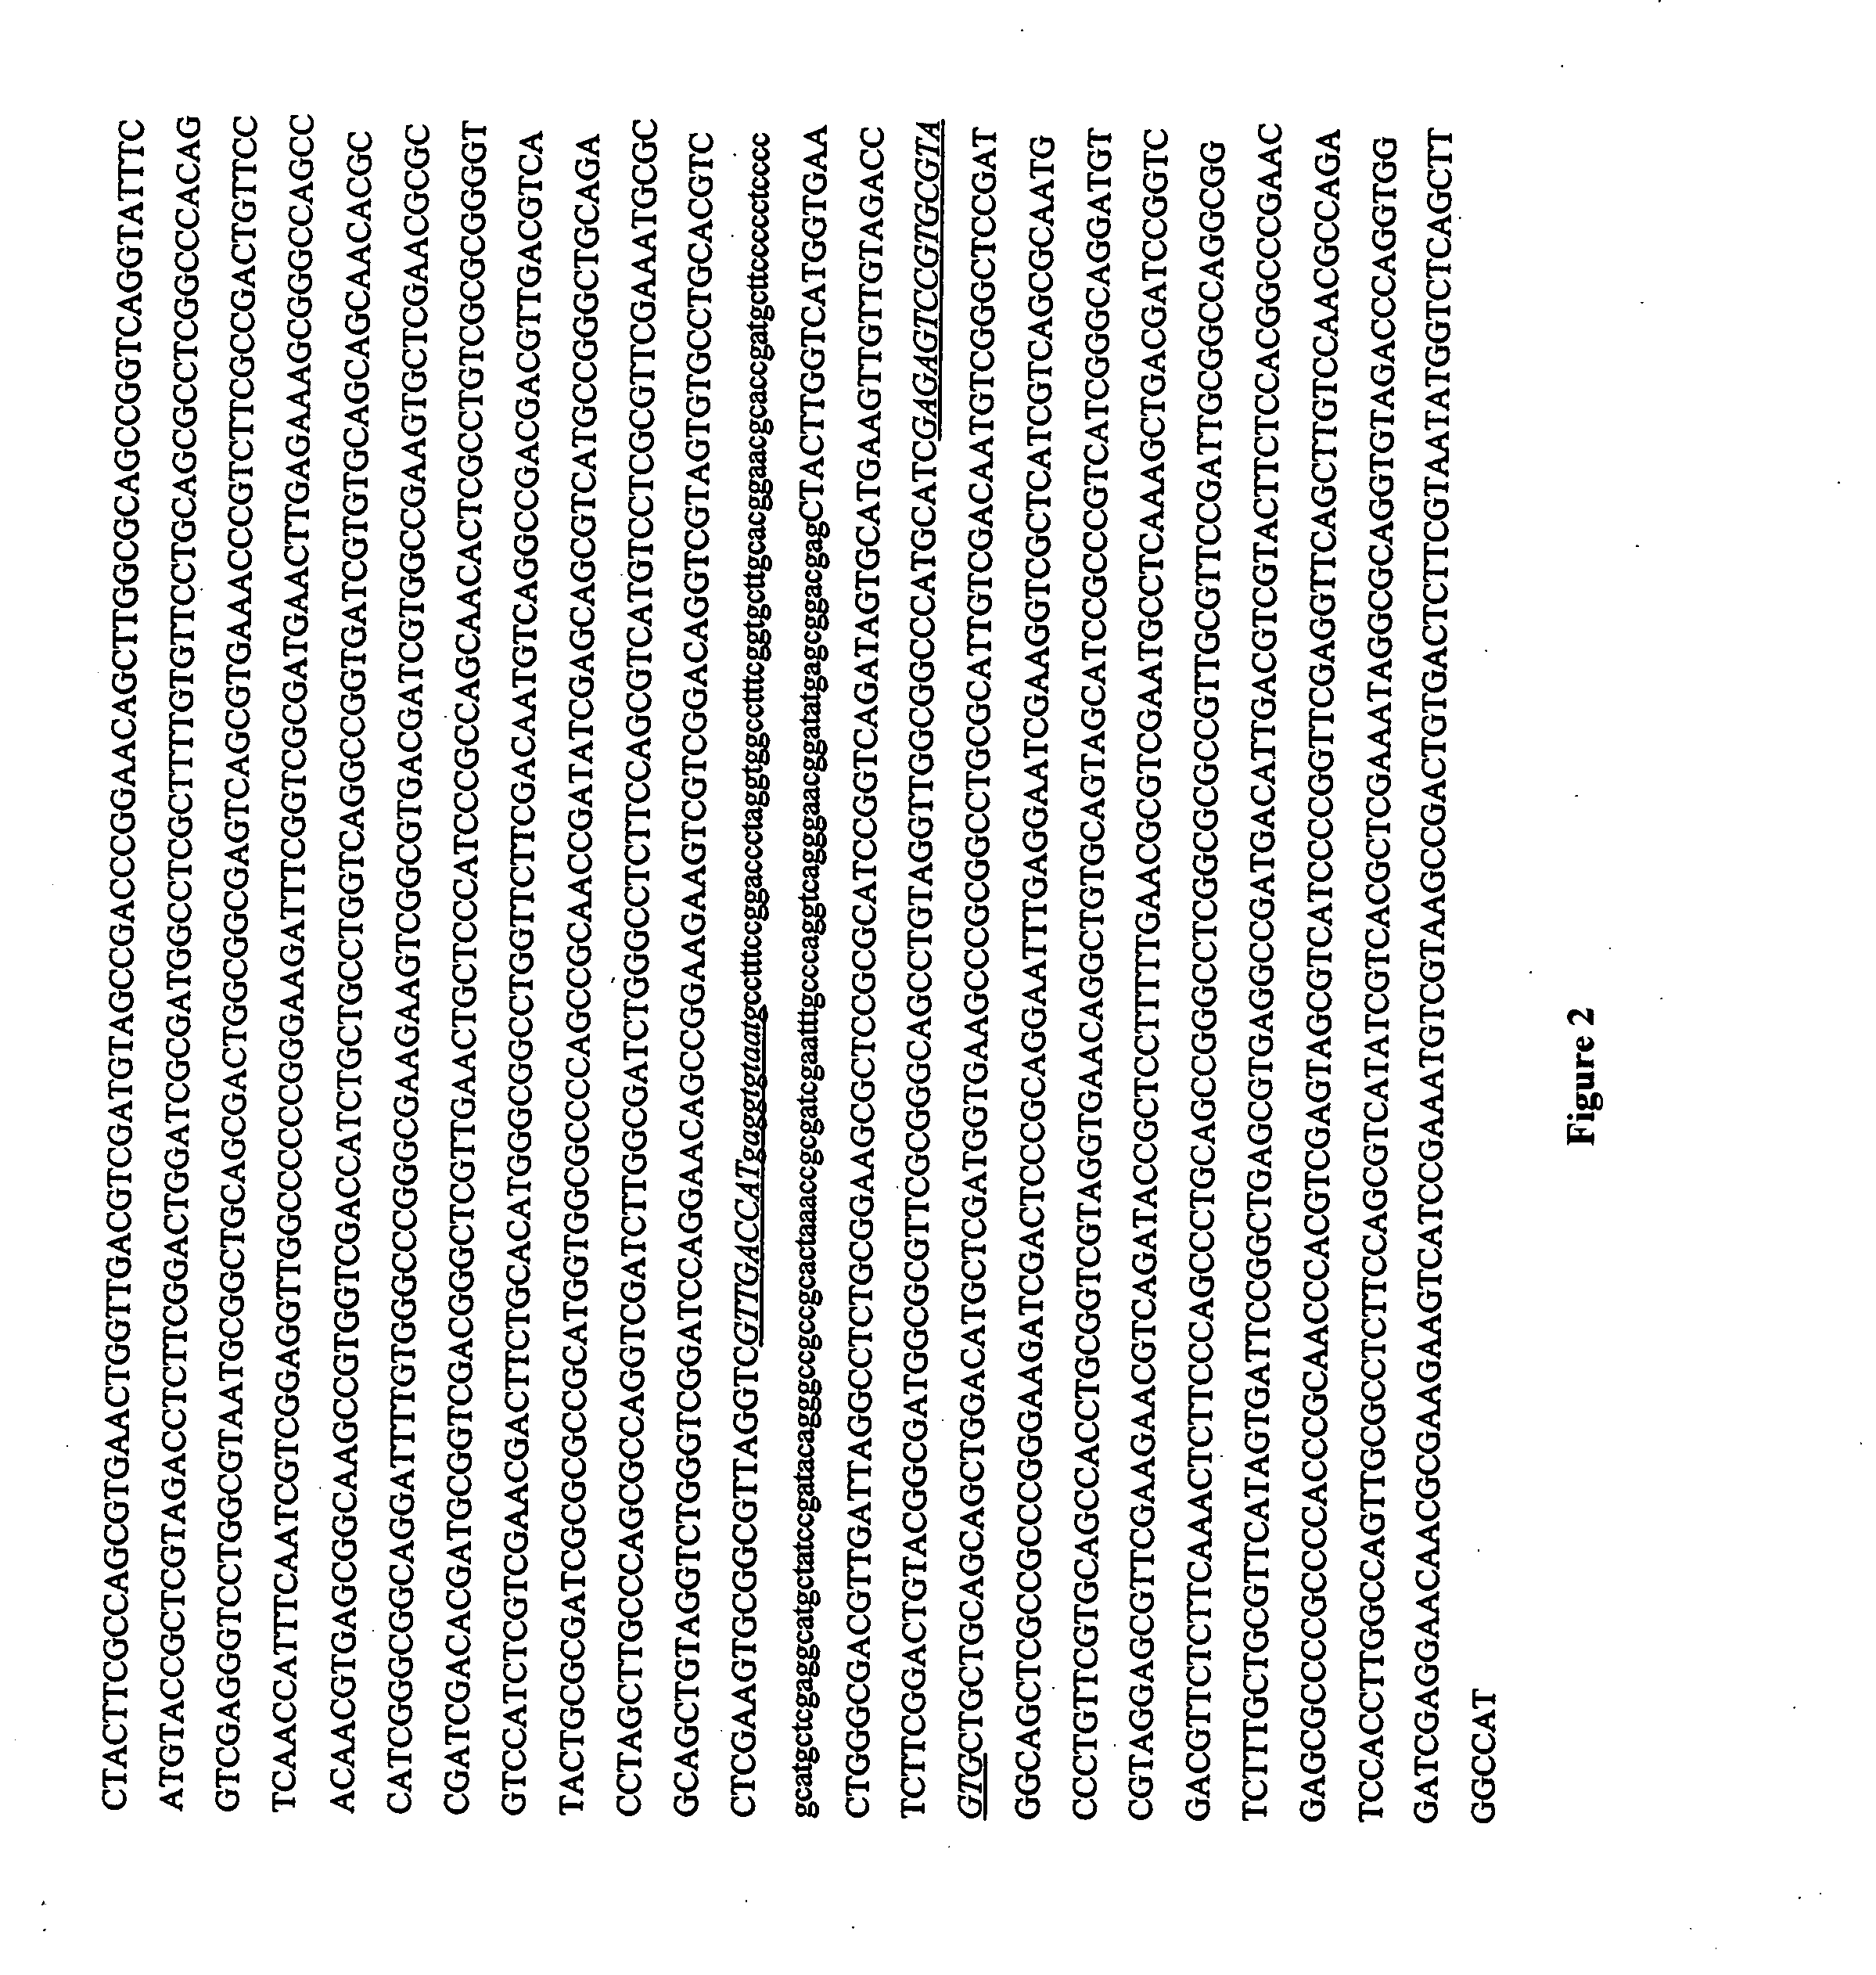 Method for detecting pathogenic mycobacteria in clinical specimens